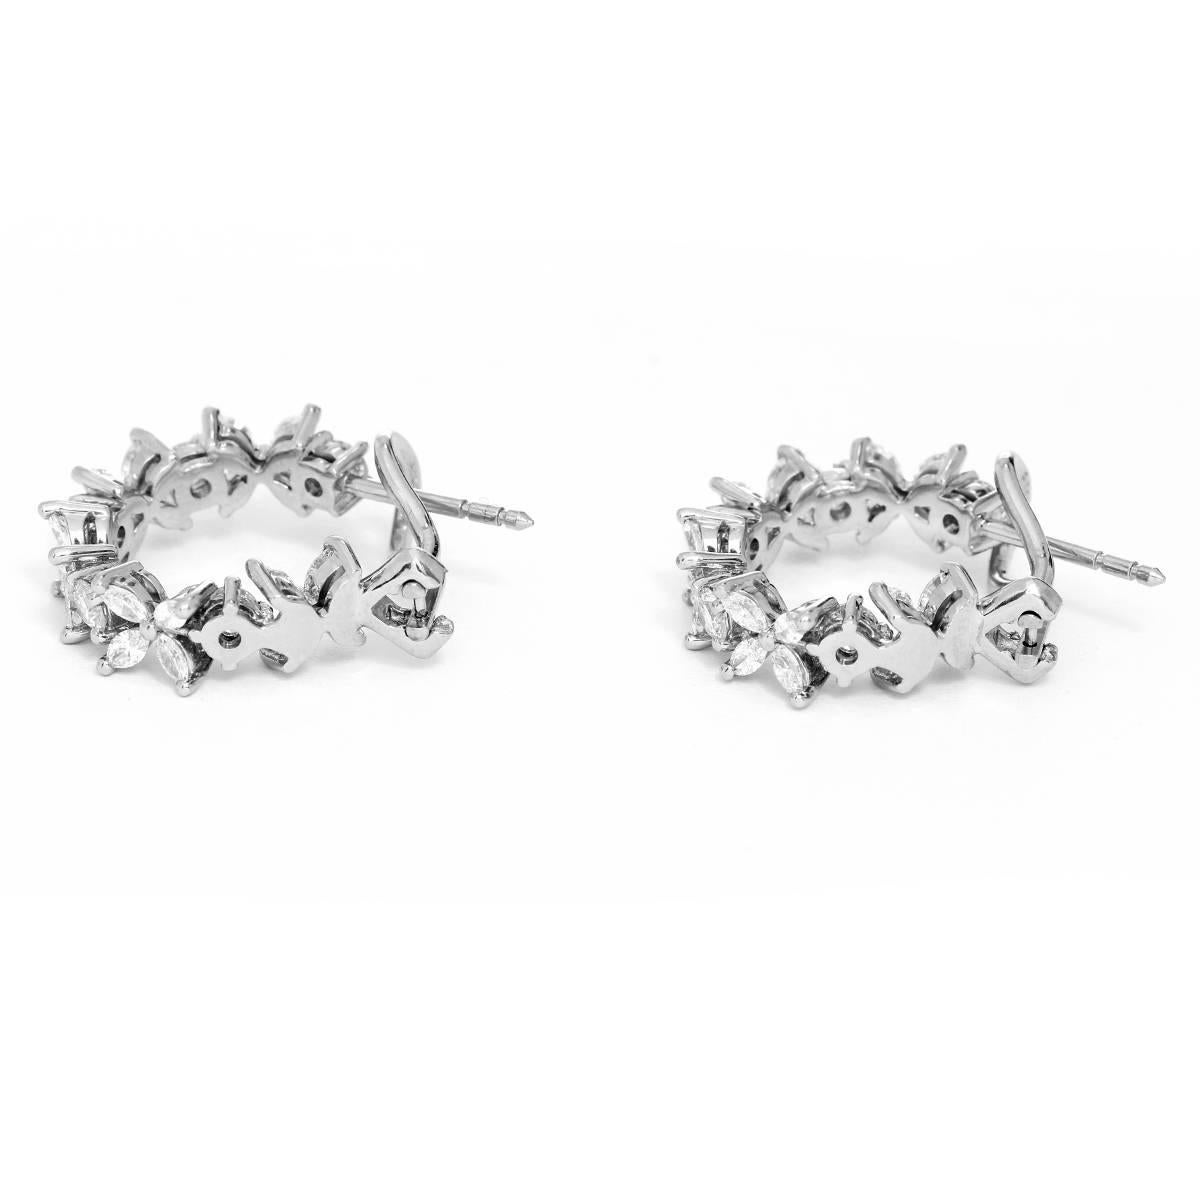 Tiffany & Co. Victoria Alternating Hoop Earrings - Marquise and round brilliant diamonds set into a beautiful floral design on platinum. Signed Tiffany & Co. Diamond 2.08 cts. Total weight 11.3 grams.